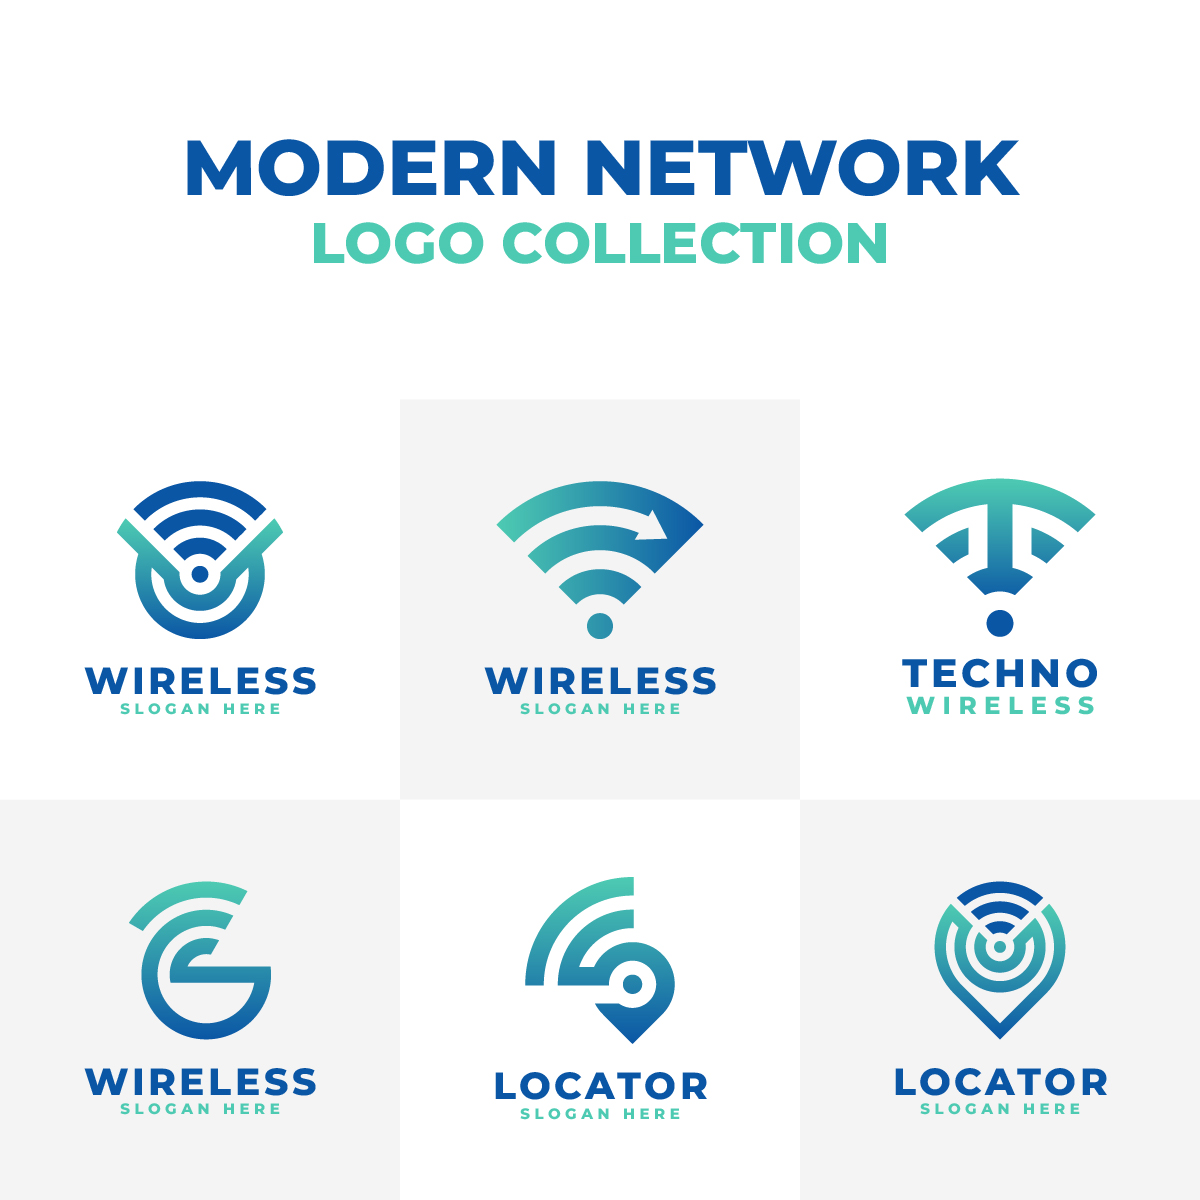 Modern Digital Network Logo Collection cover image.